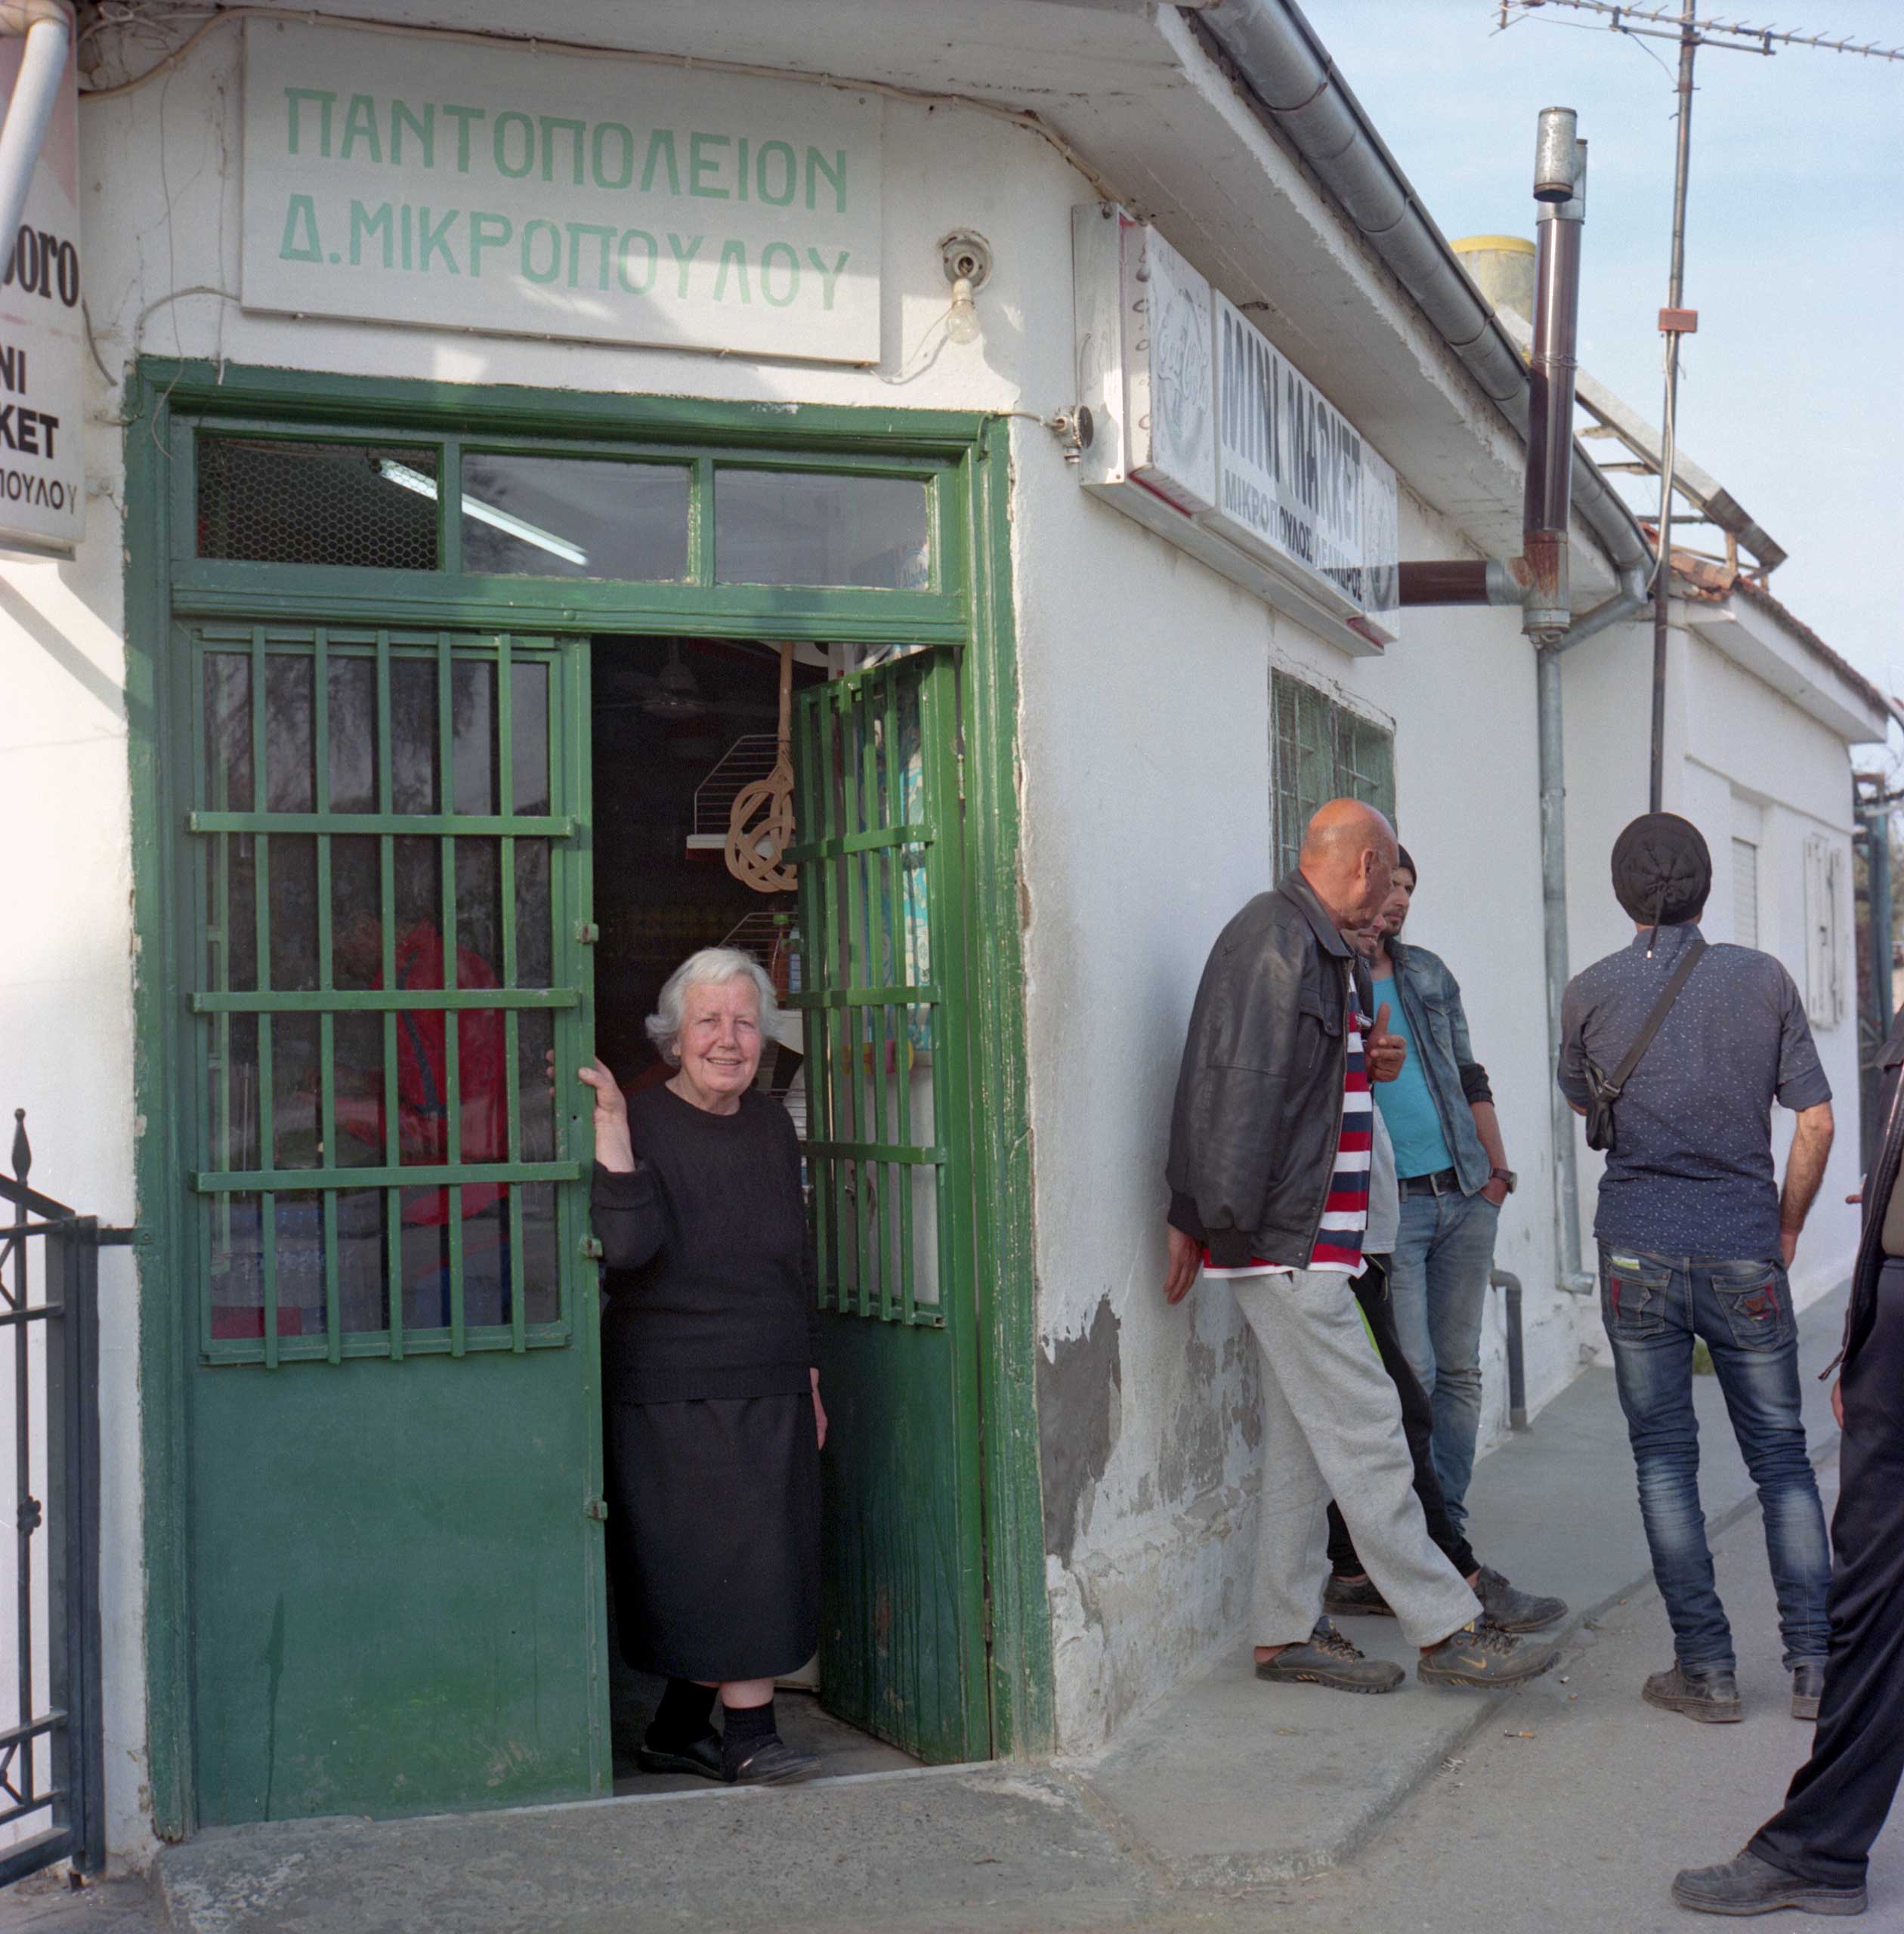 Antonia Mikropolou, 74, a shopkeeper in Idomeni
                              Antonia Mikropolou is cordial with the refugees that come to buy snacks, drinks and cigarettes. Since the inflow of refugees, this small convenience store has been turning much higher profits than before. Idomeni, Greece. April 2016.